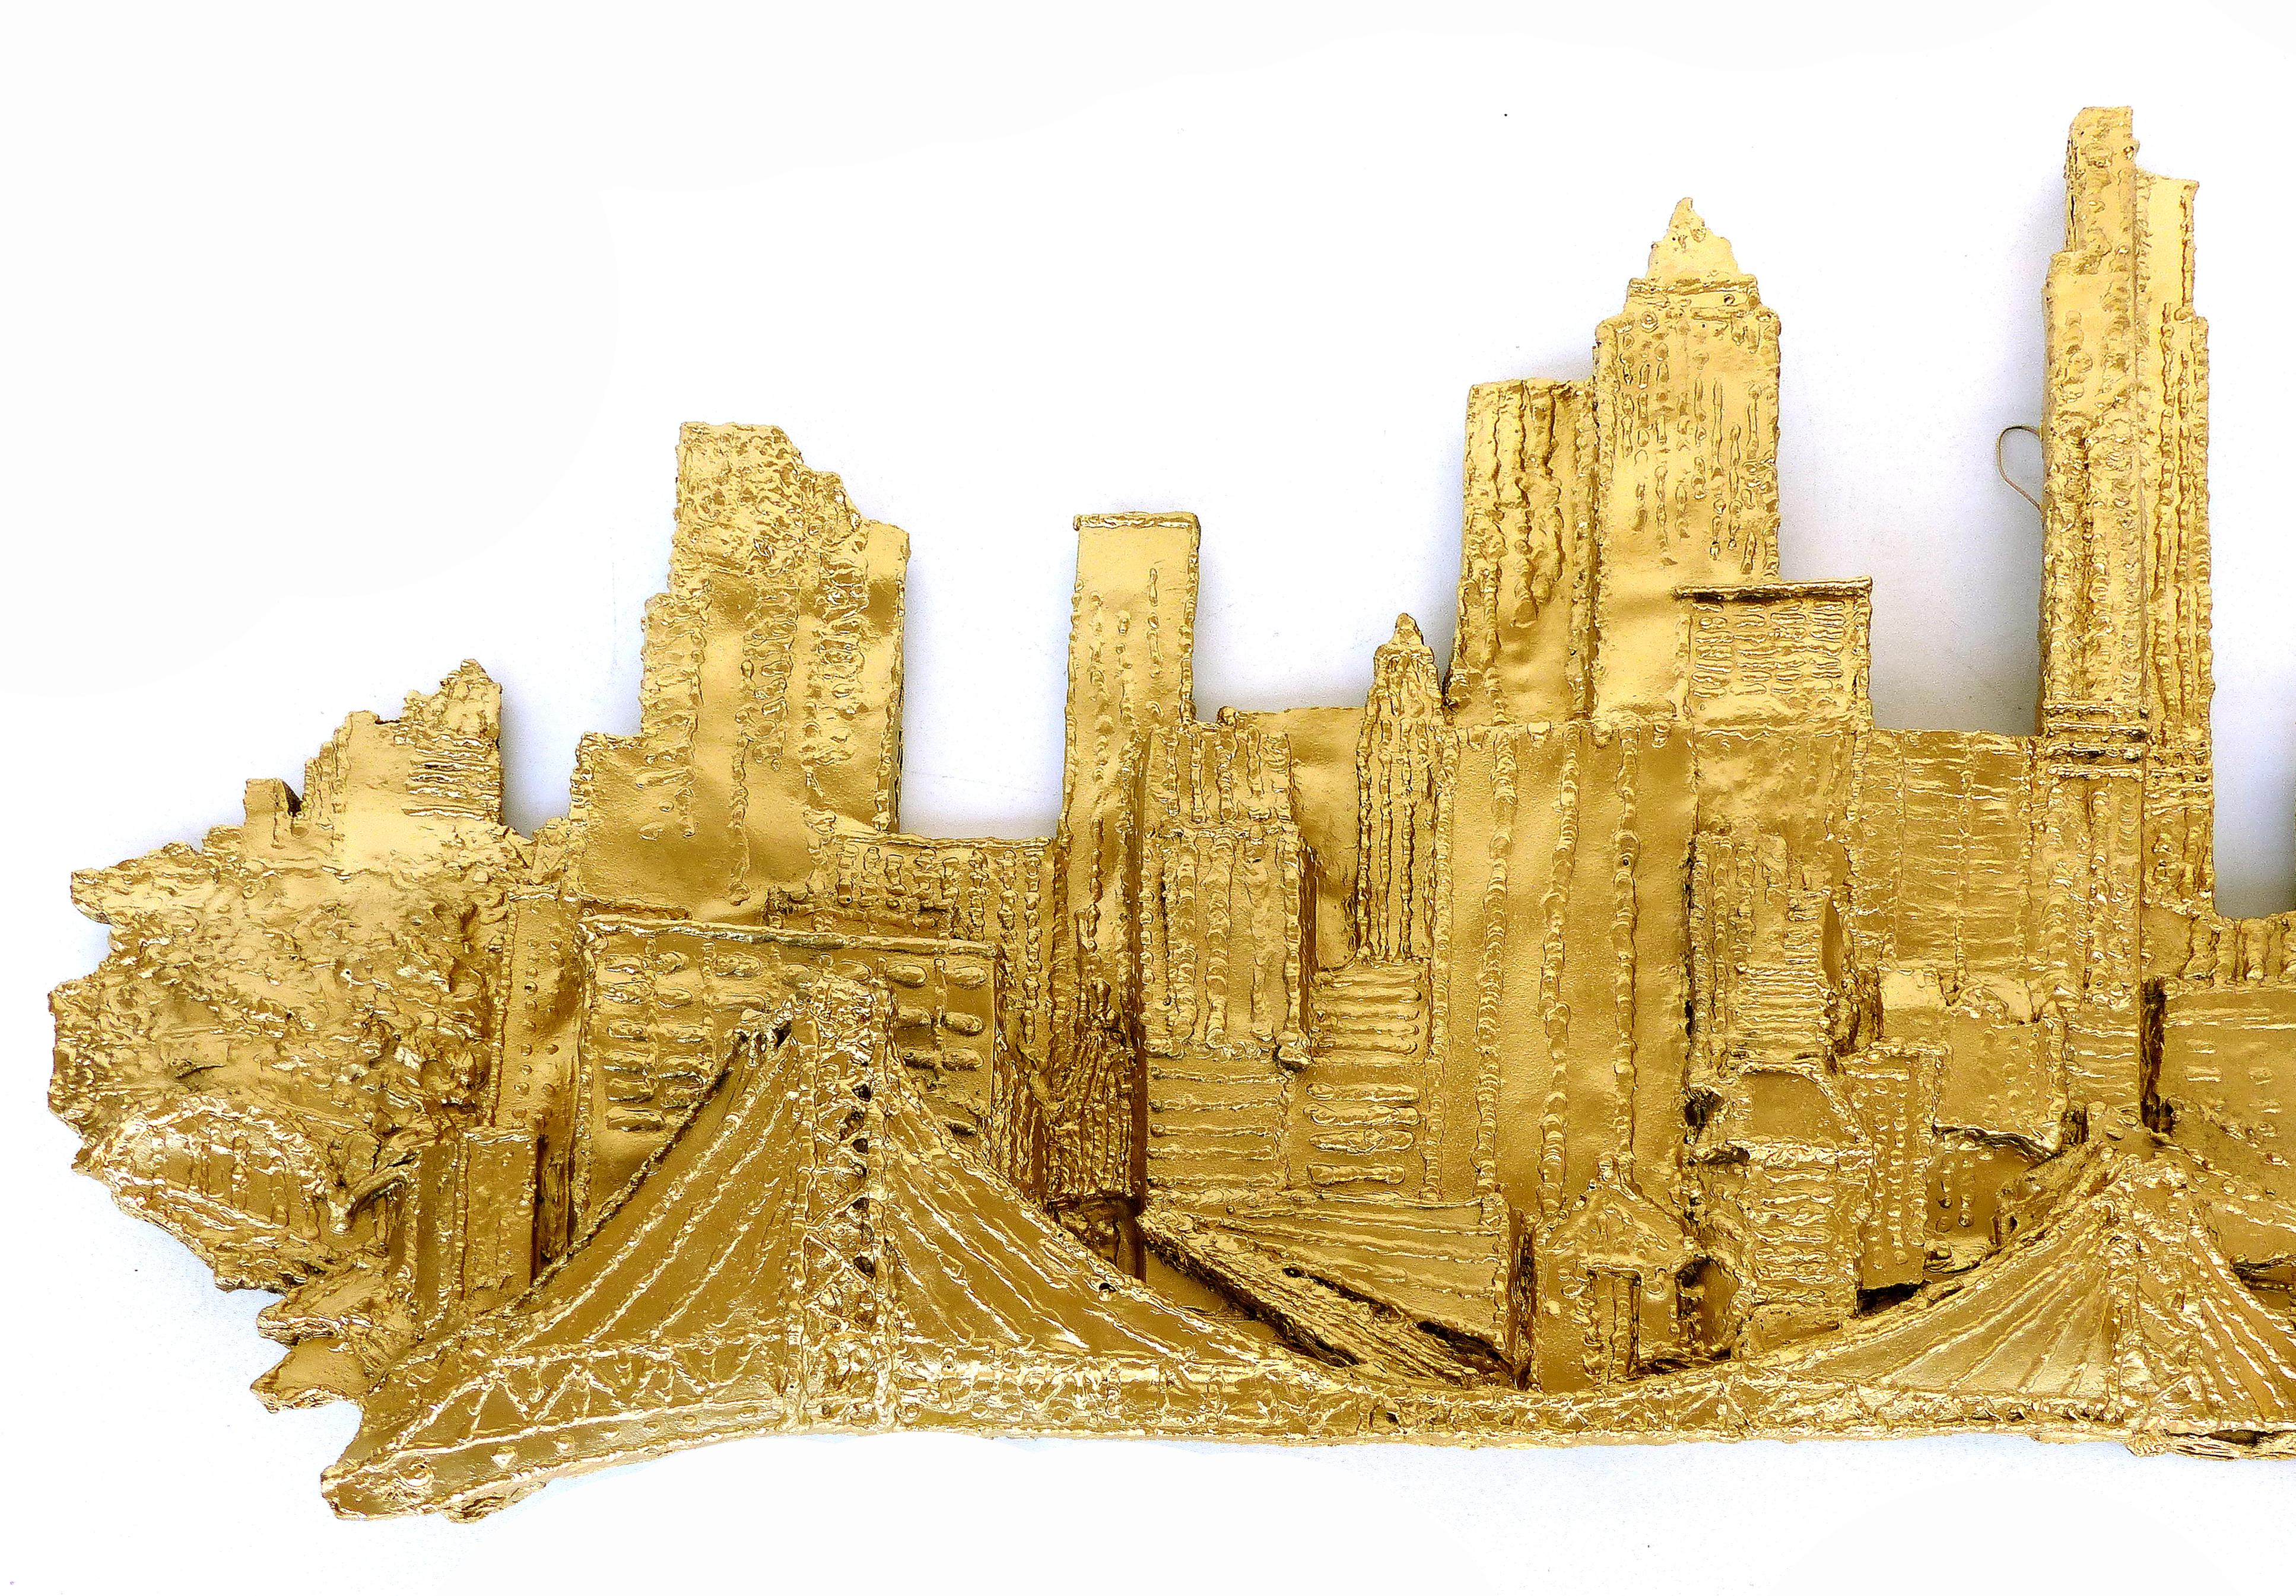 Mid-Century Modern Brutalist NYC Cityscape wall sculpture, signed
Offered for sale is a Mid-Century Modern Brutalist Syroco style New York City gilt fiberglass wall sculpture depicting a city & bridge view. The sculpture is signed underneath and is